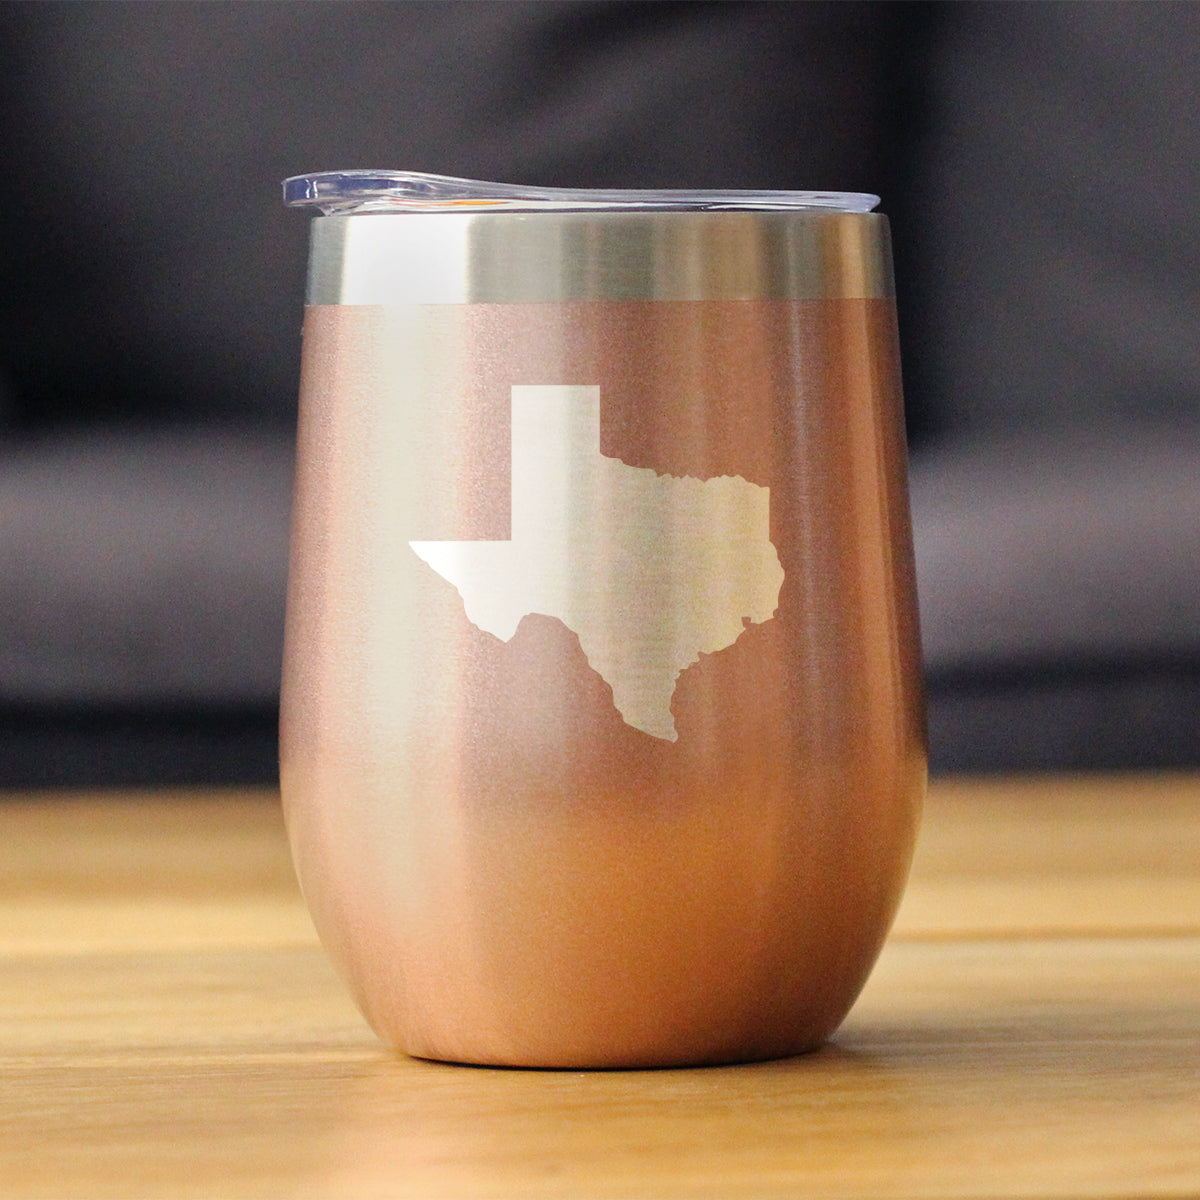 Texas State Outline - Wine Tumbler Glass with Sliding Lid - Stainless Steel Insulated Mug - State Themed Decor and Gifts for Texan Women &amp; Men